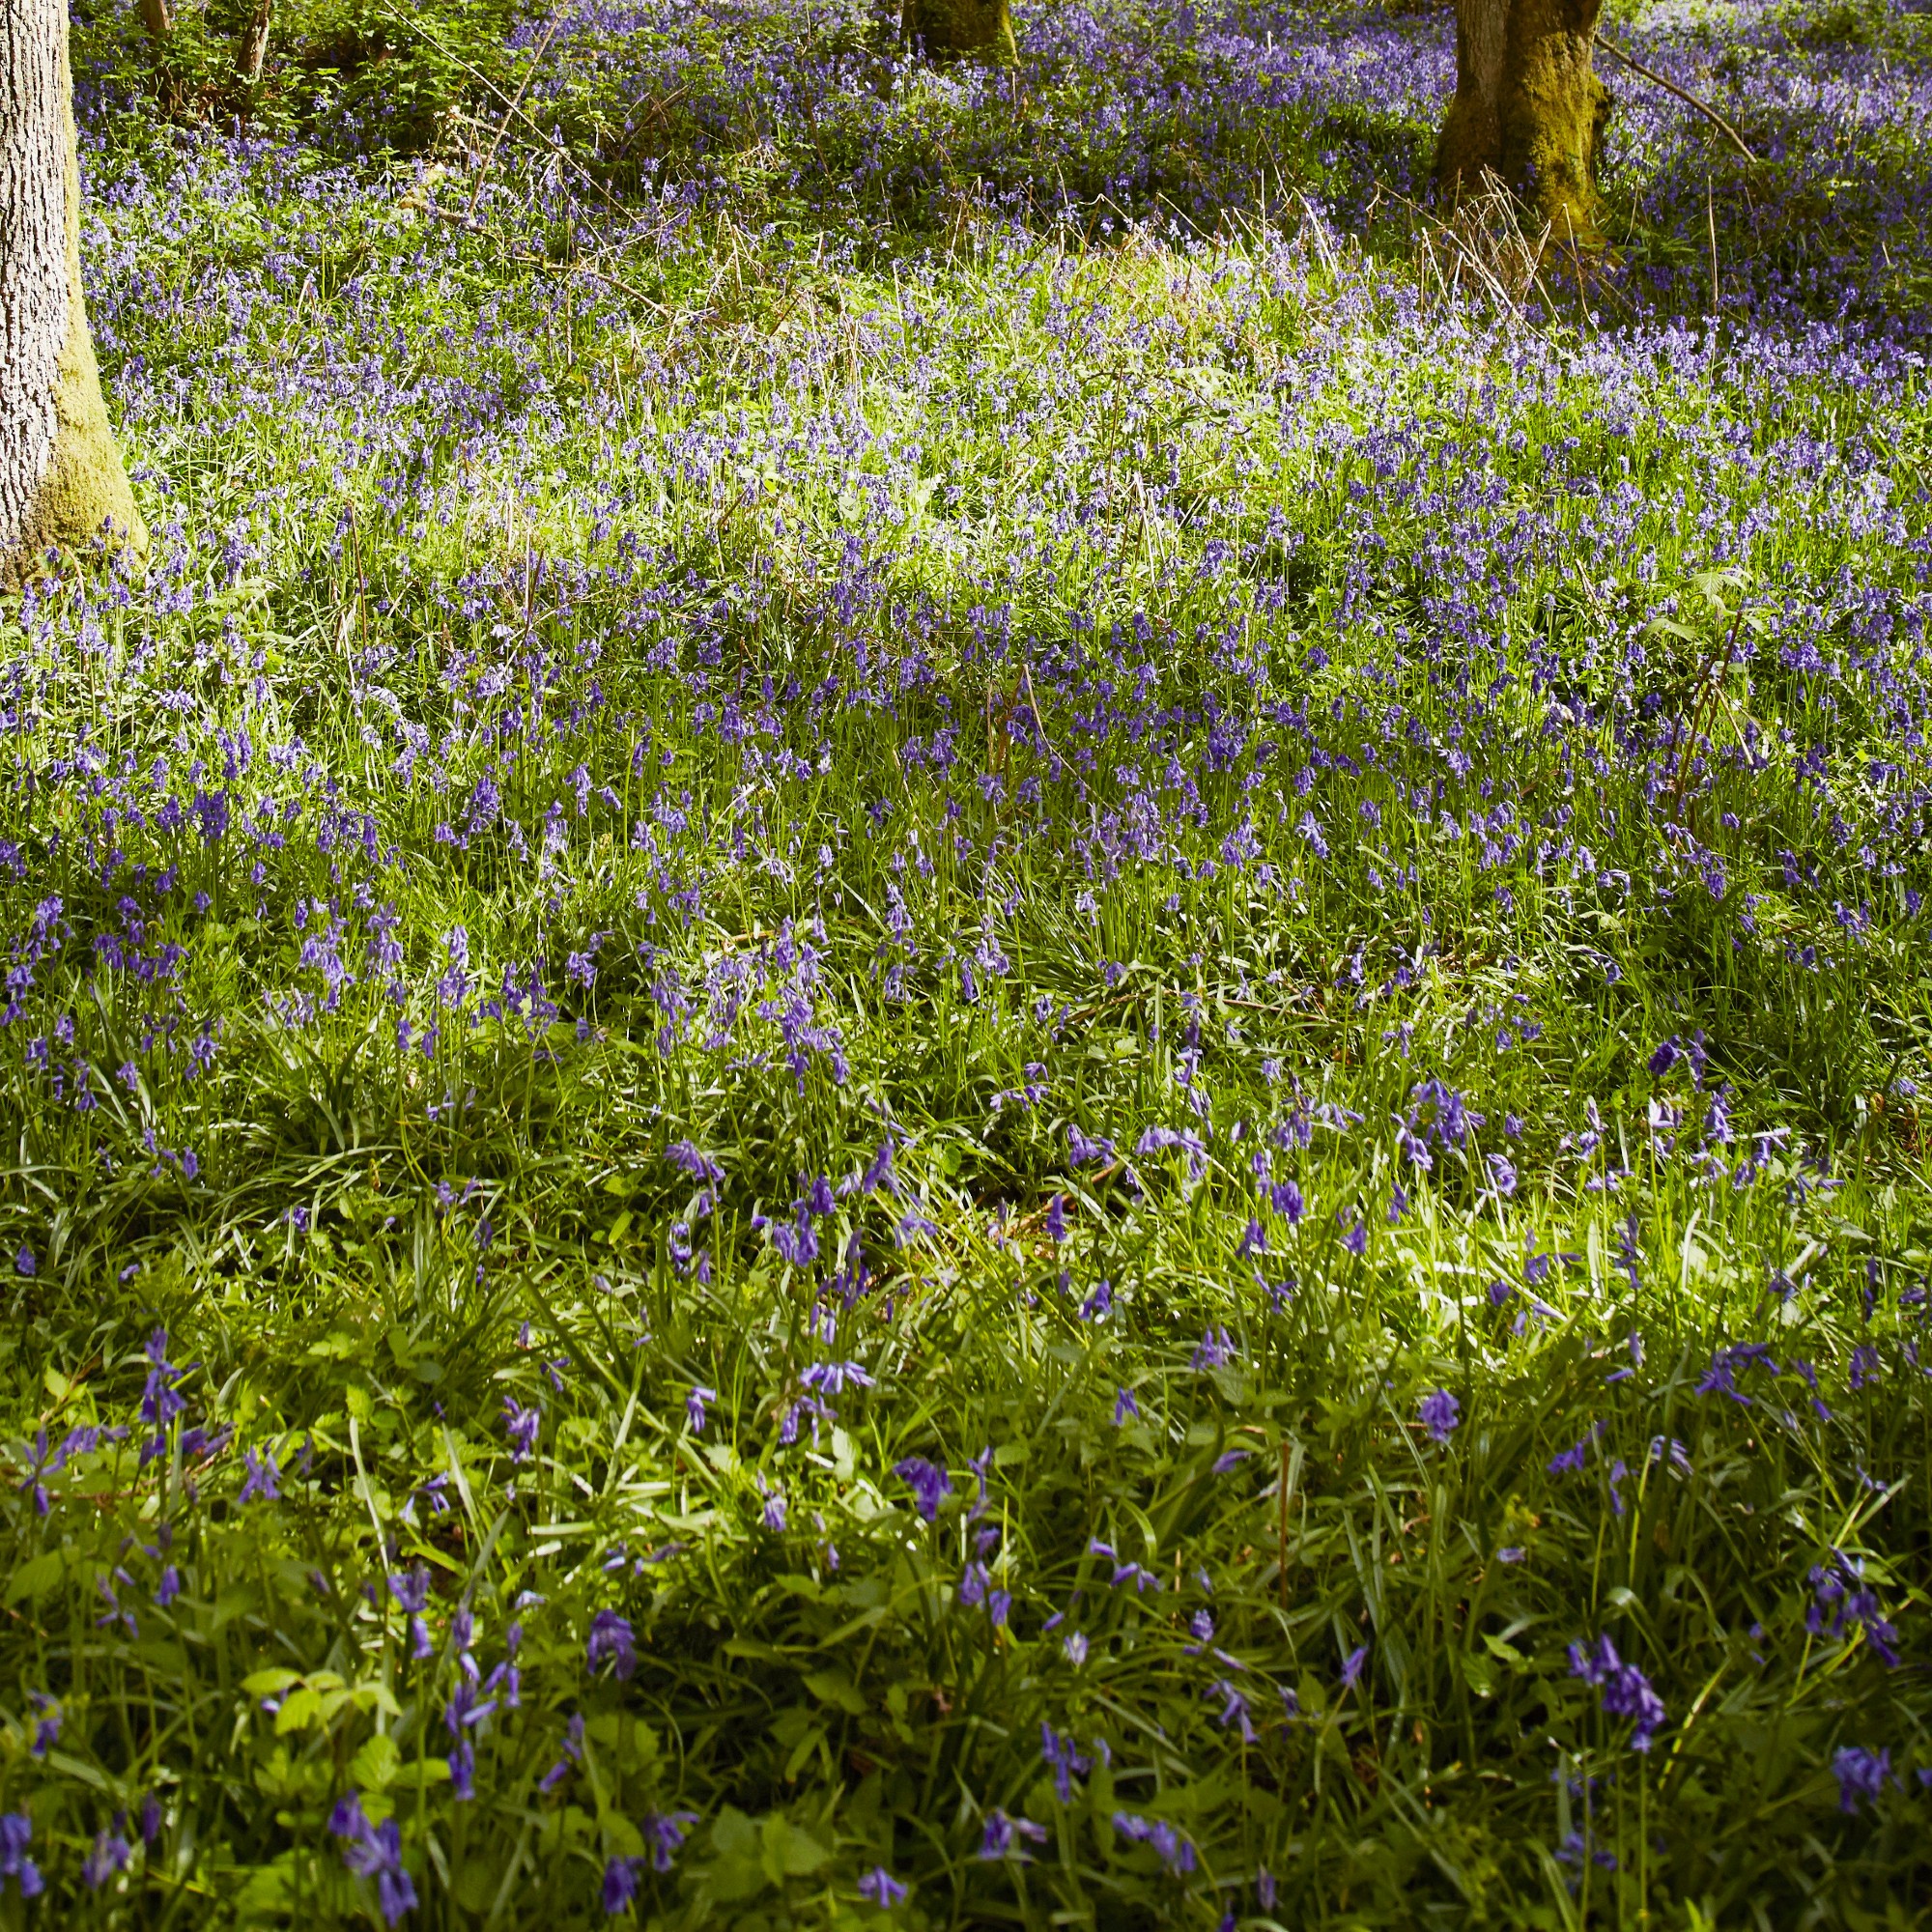 A bluebell meadow